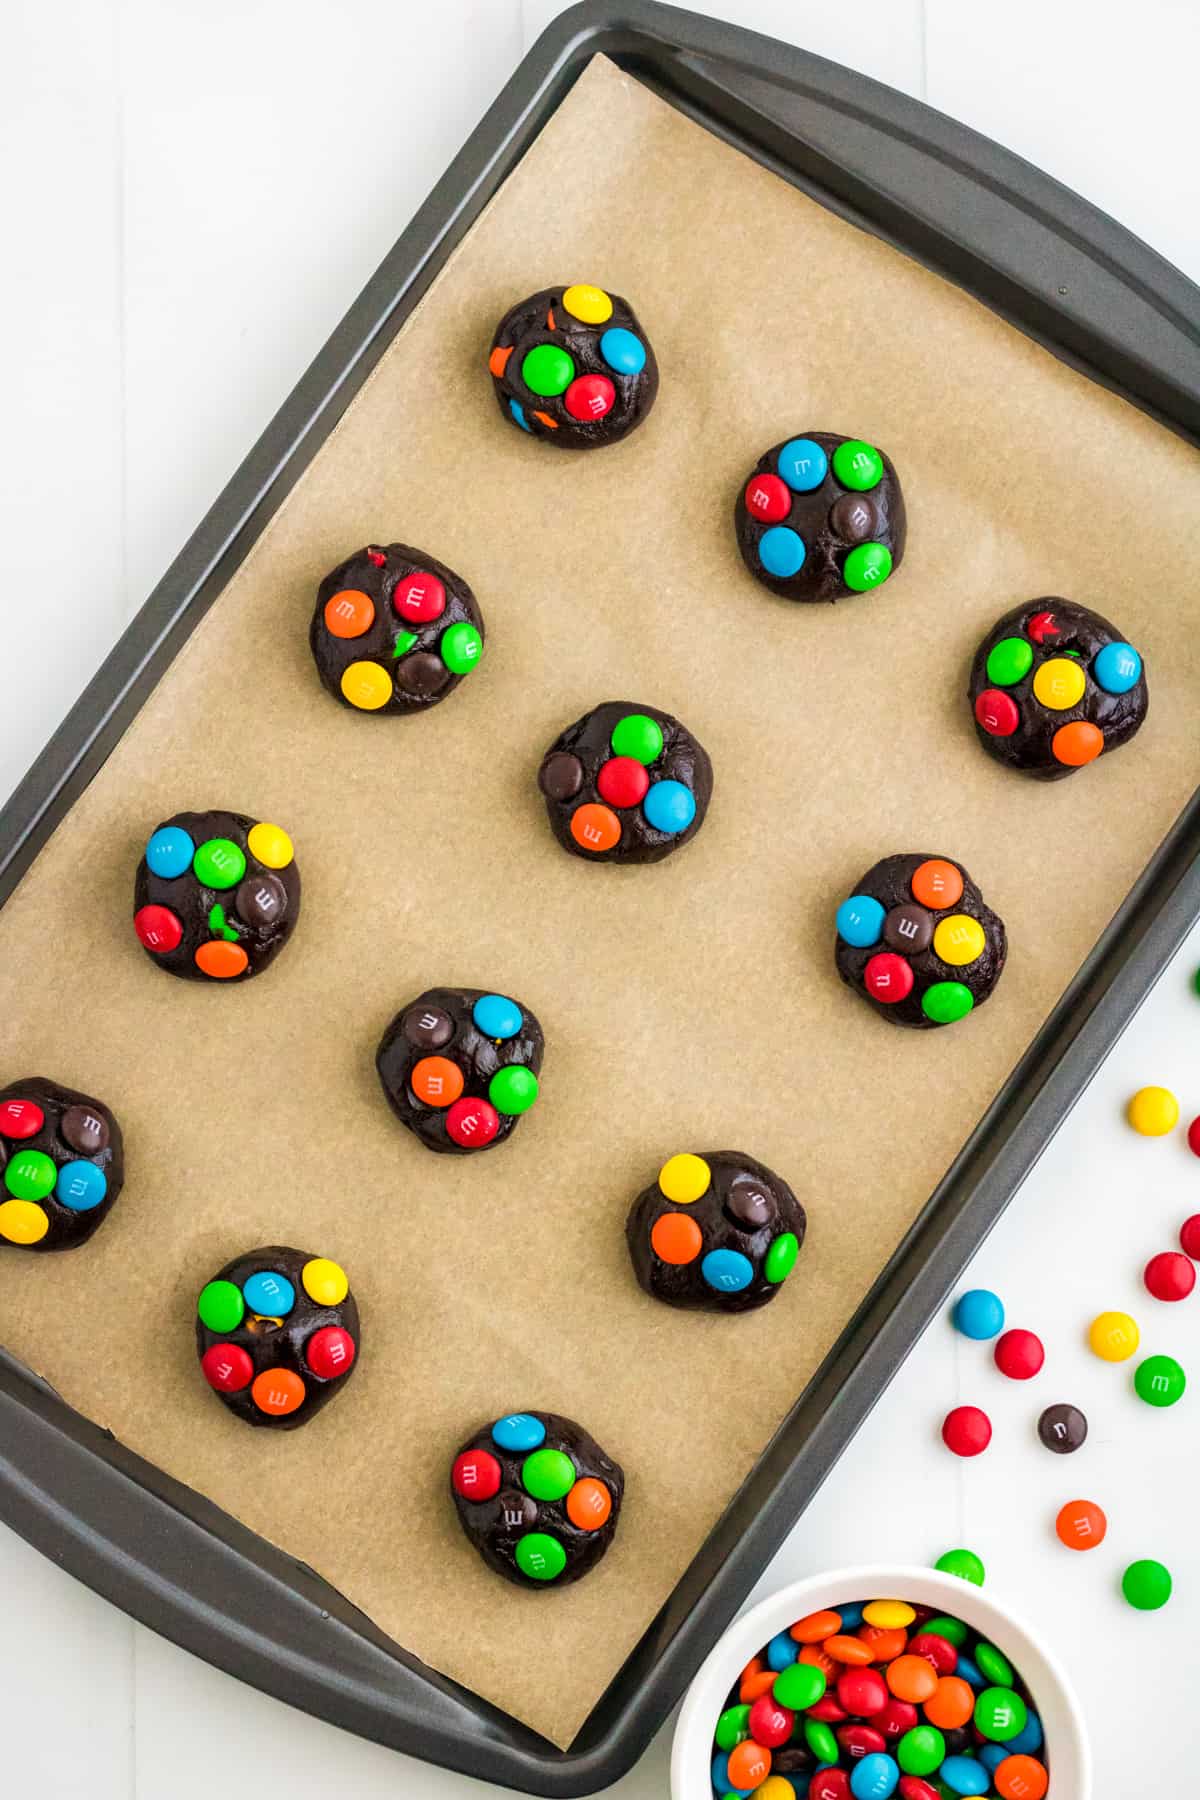 Balls of chocolate cake mix cookie dough with colorful M&Ms pressed into the top on a parchment lined baking sheet.